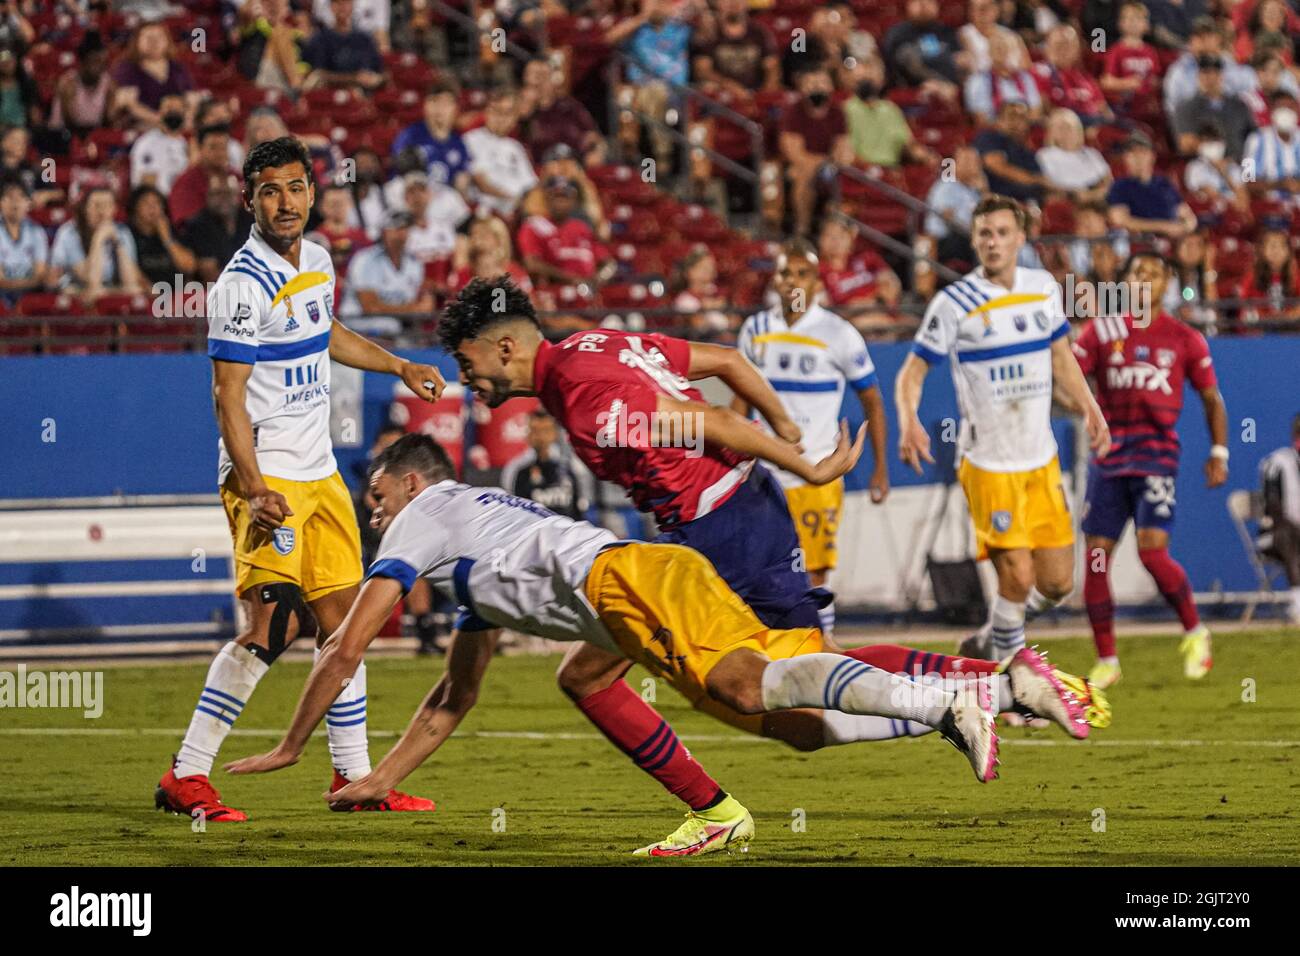 Dallas, Texas, USA, September 11, 2021, FC Dallas forward Ricardo Pepi #16 makes a header and score dudring th second half of the match at Toyota Stadium.  (Photo Credit:  Marty Jean-Louis) Stock Photo